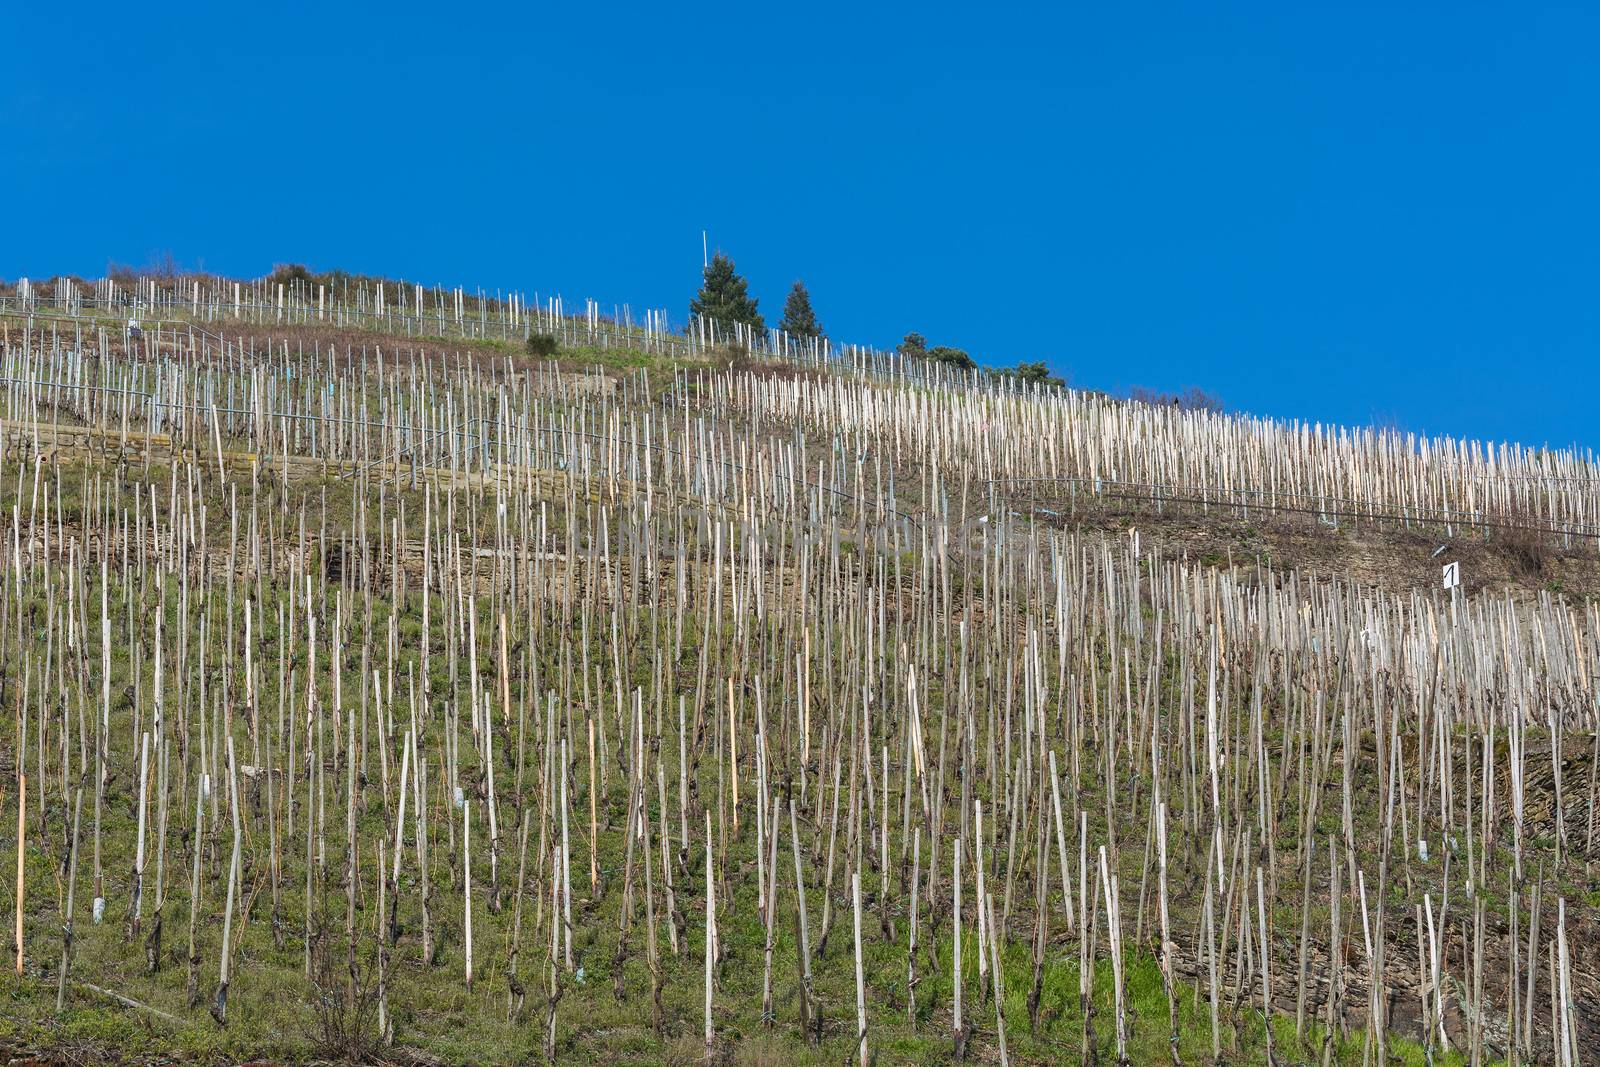 Vineyards on the Moselle by JFsPic